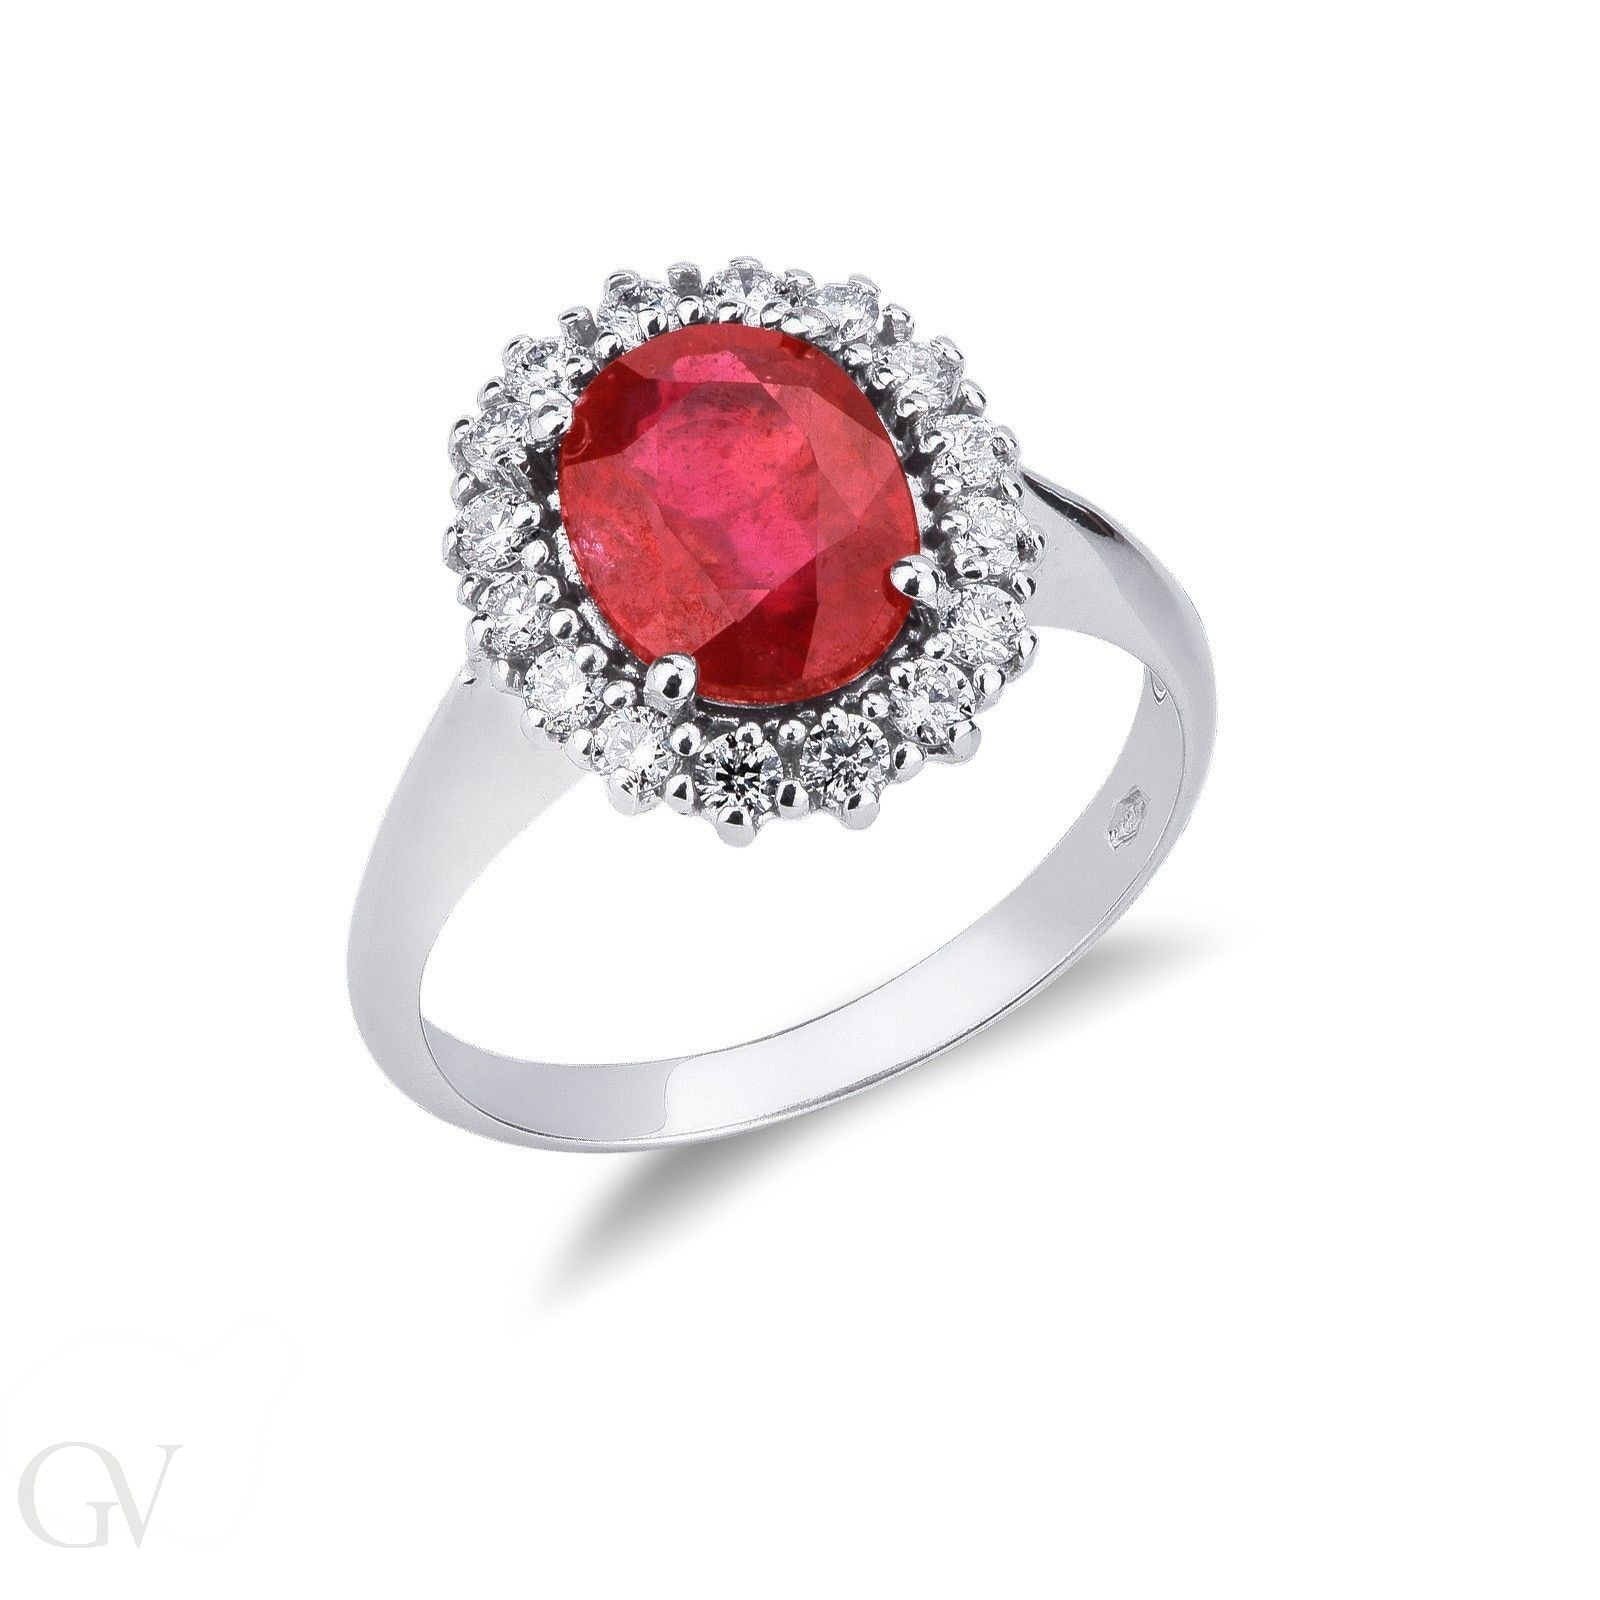 Halo Ring With A Central Ruby And Diamonds White Gold 18k Measure 15 Within Ruby Halo Rings (View 1 of 25)